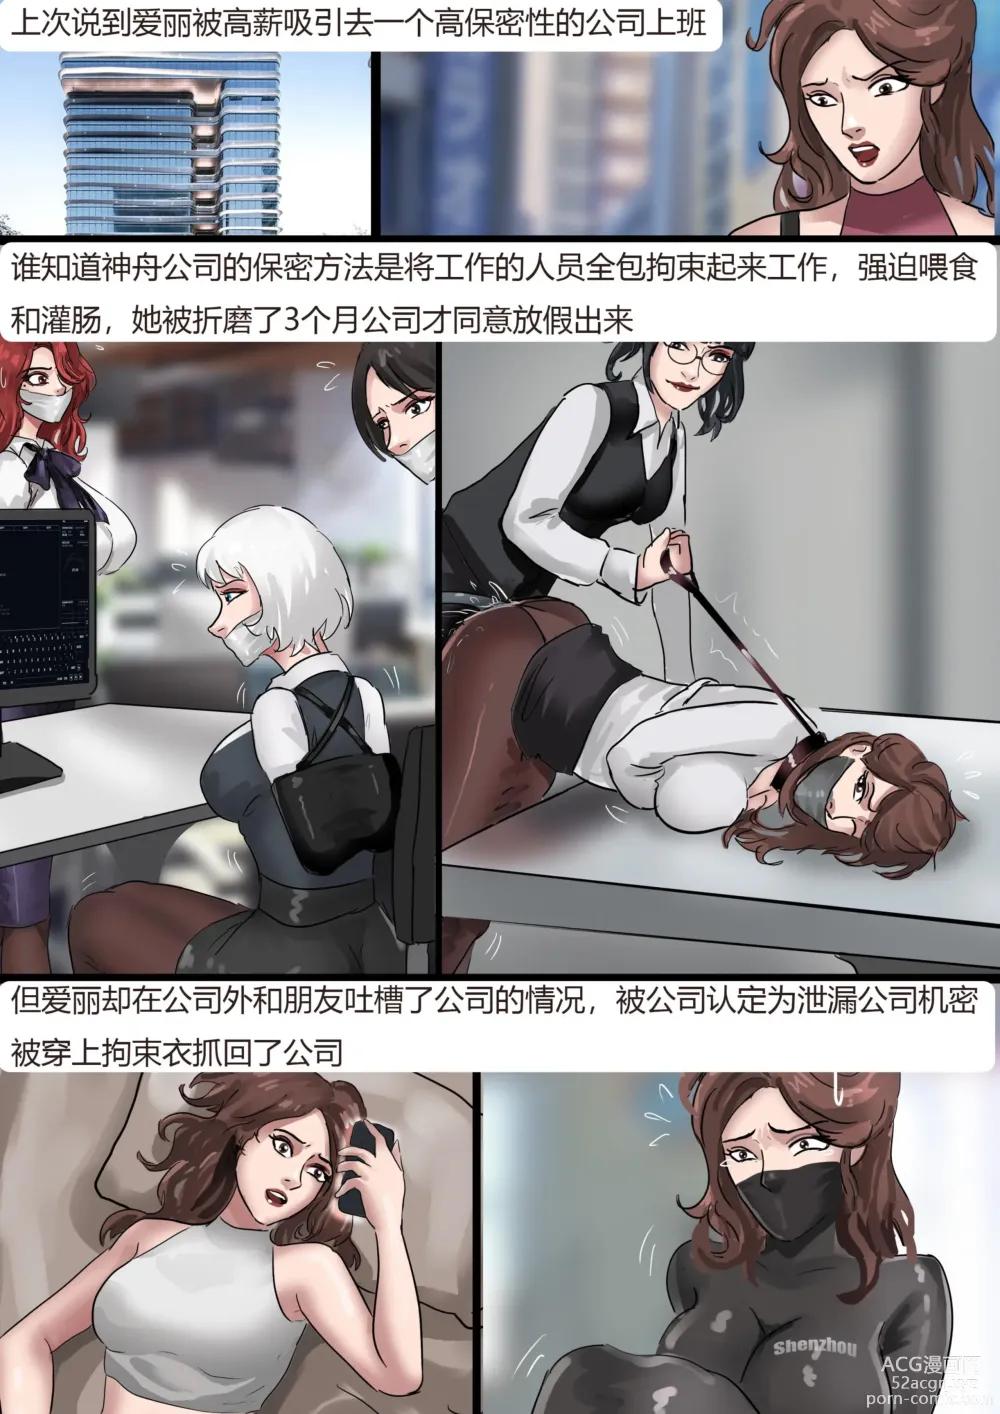 Page 2 of doujinshi The Bondage Office 02